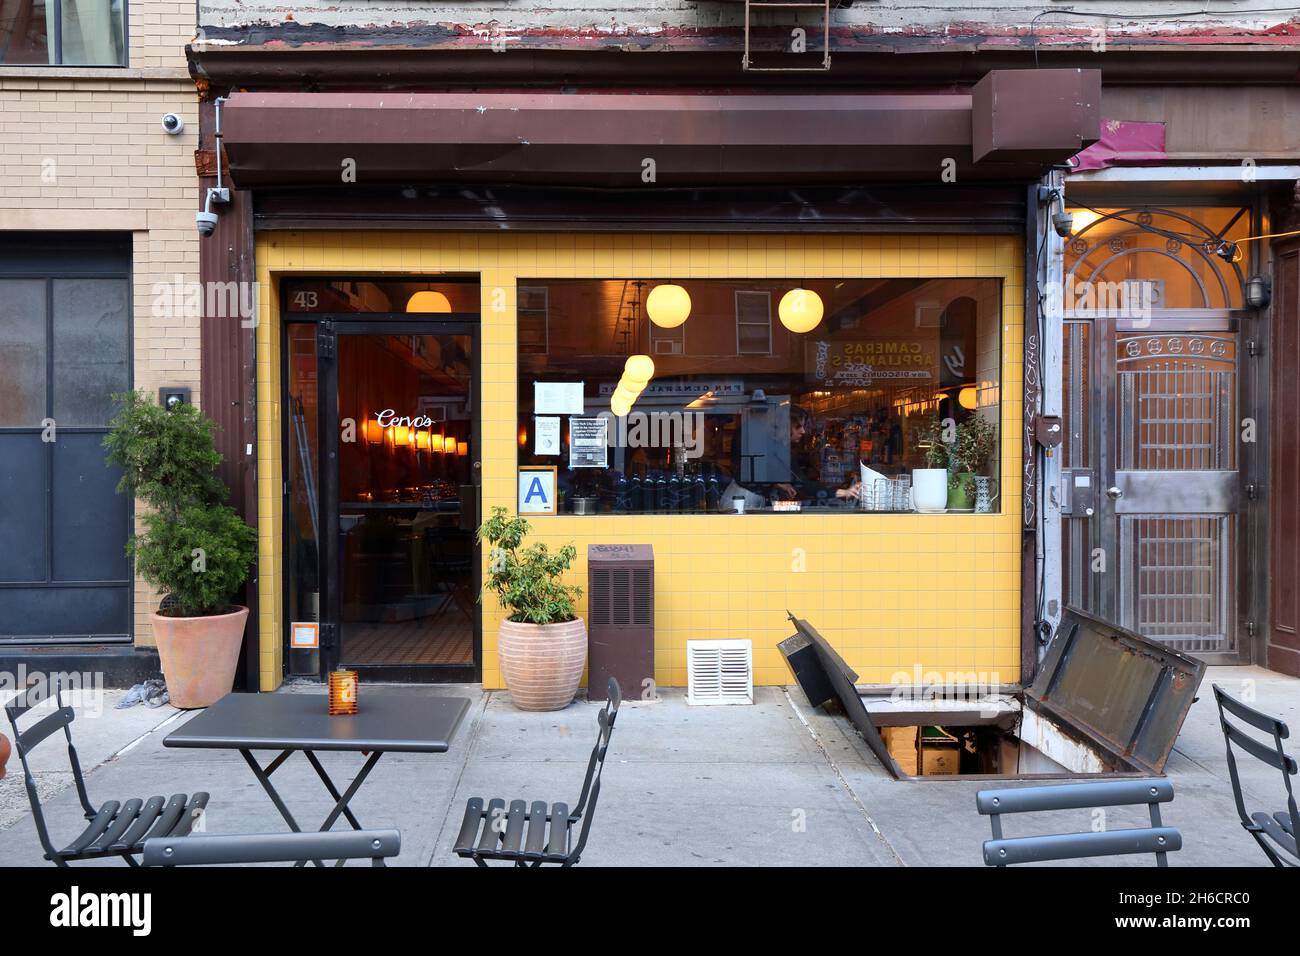 Cervo's, 43 Canal St, New York, NY. exterior storefront of an Iberian inspired seafood restaurant in Manhattan's Lower East Side. Stock Photo